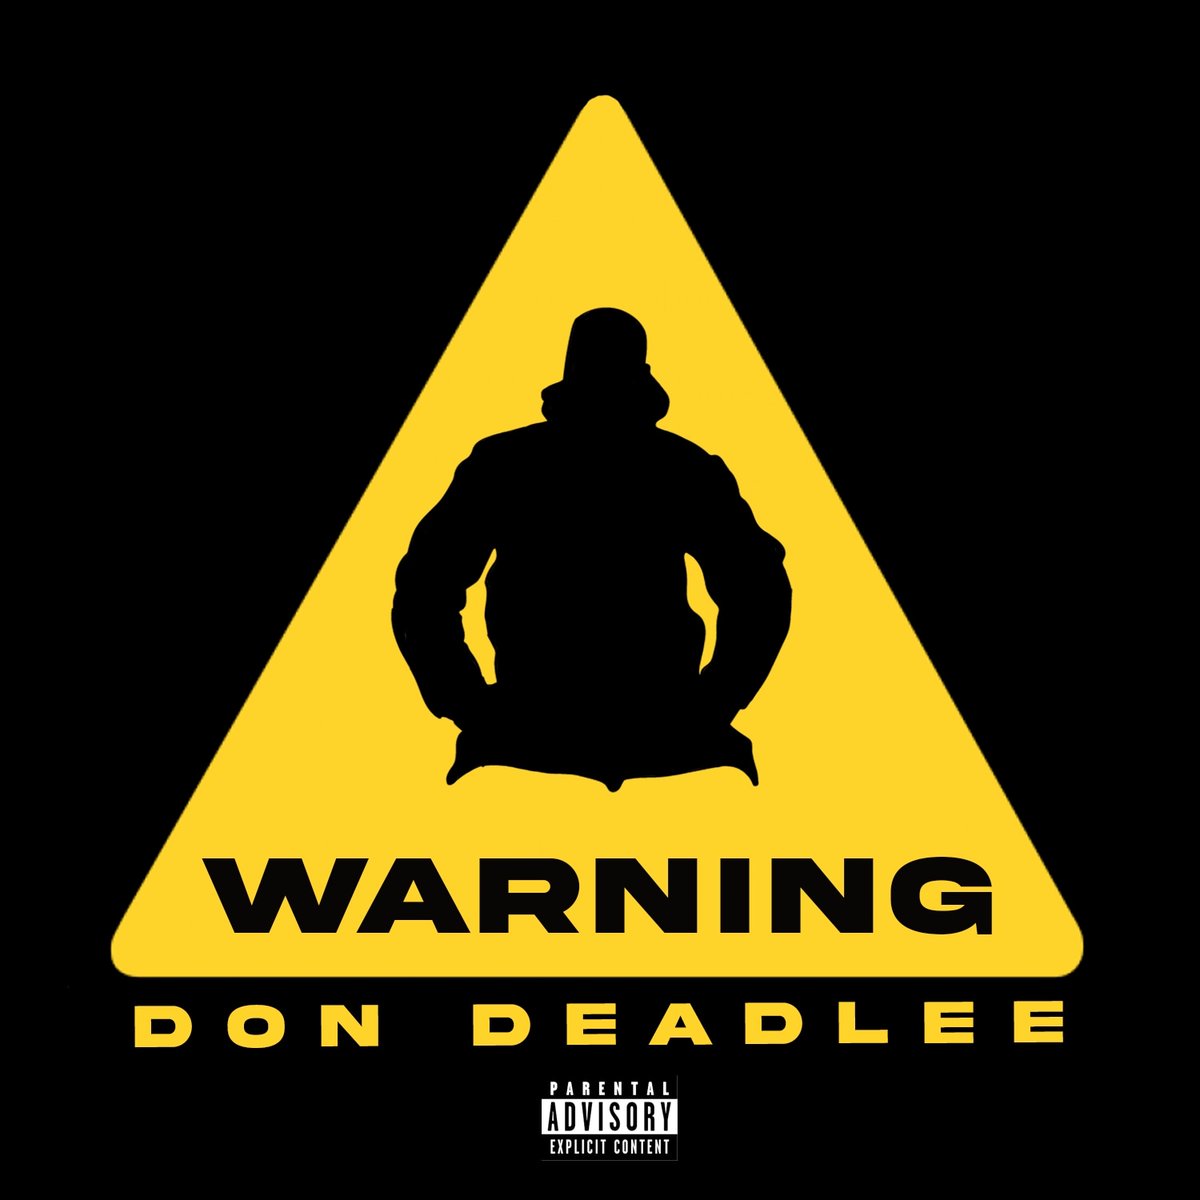 Friday, this friday, bandamp friday... new tune by myself the Don 'warning#fyp #touchdown #ukgrime #uktalent #unsignedartist #unsignedhype #grimeartist #grimemusic #grmdaily #linkuptv #spotify #applemusic #london #140bpm #newmusic #incoming